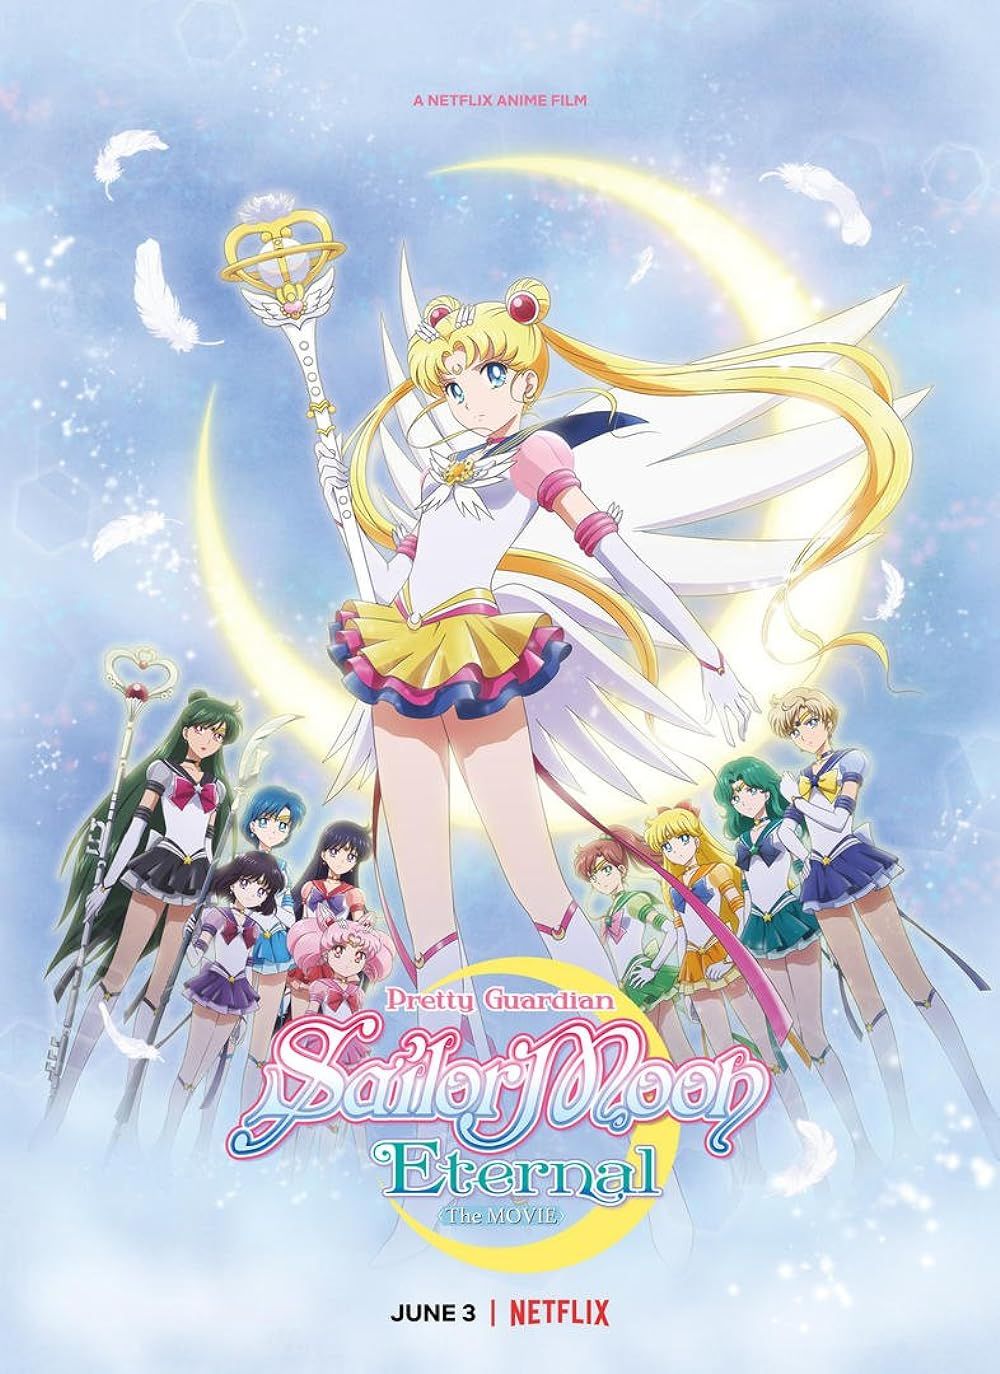 Super Sailor Moon posing with her staff, behind her the other sailors in the Poster of Sailor Moon Eternal